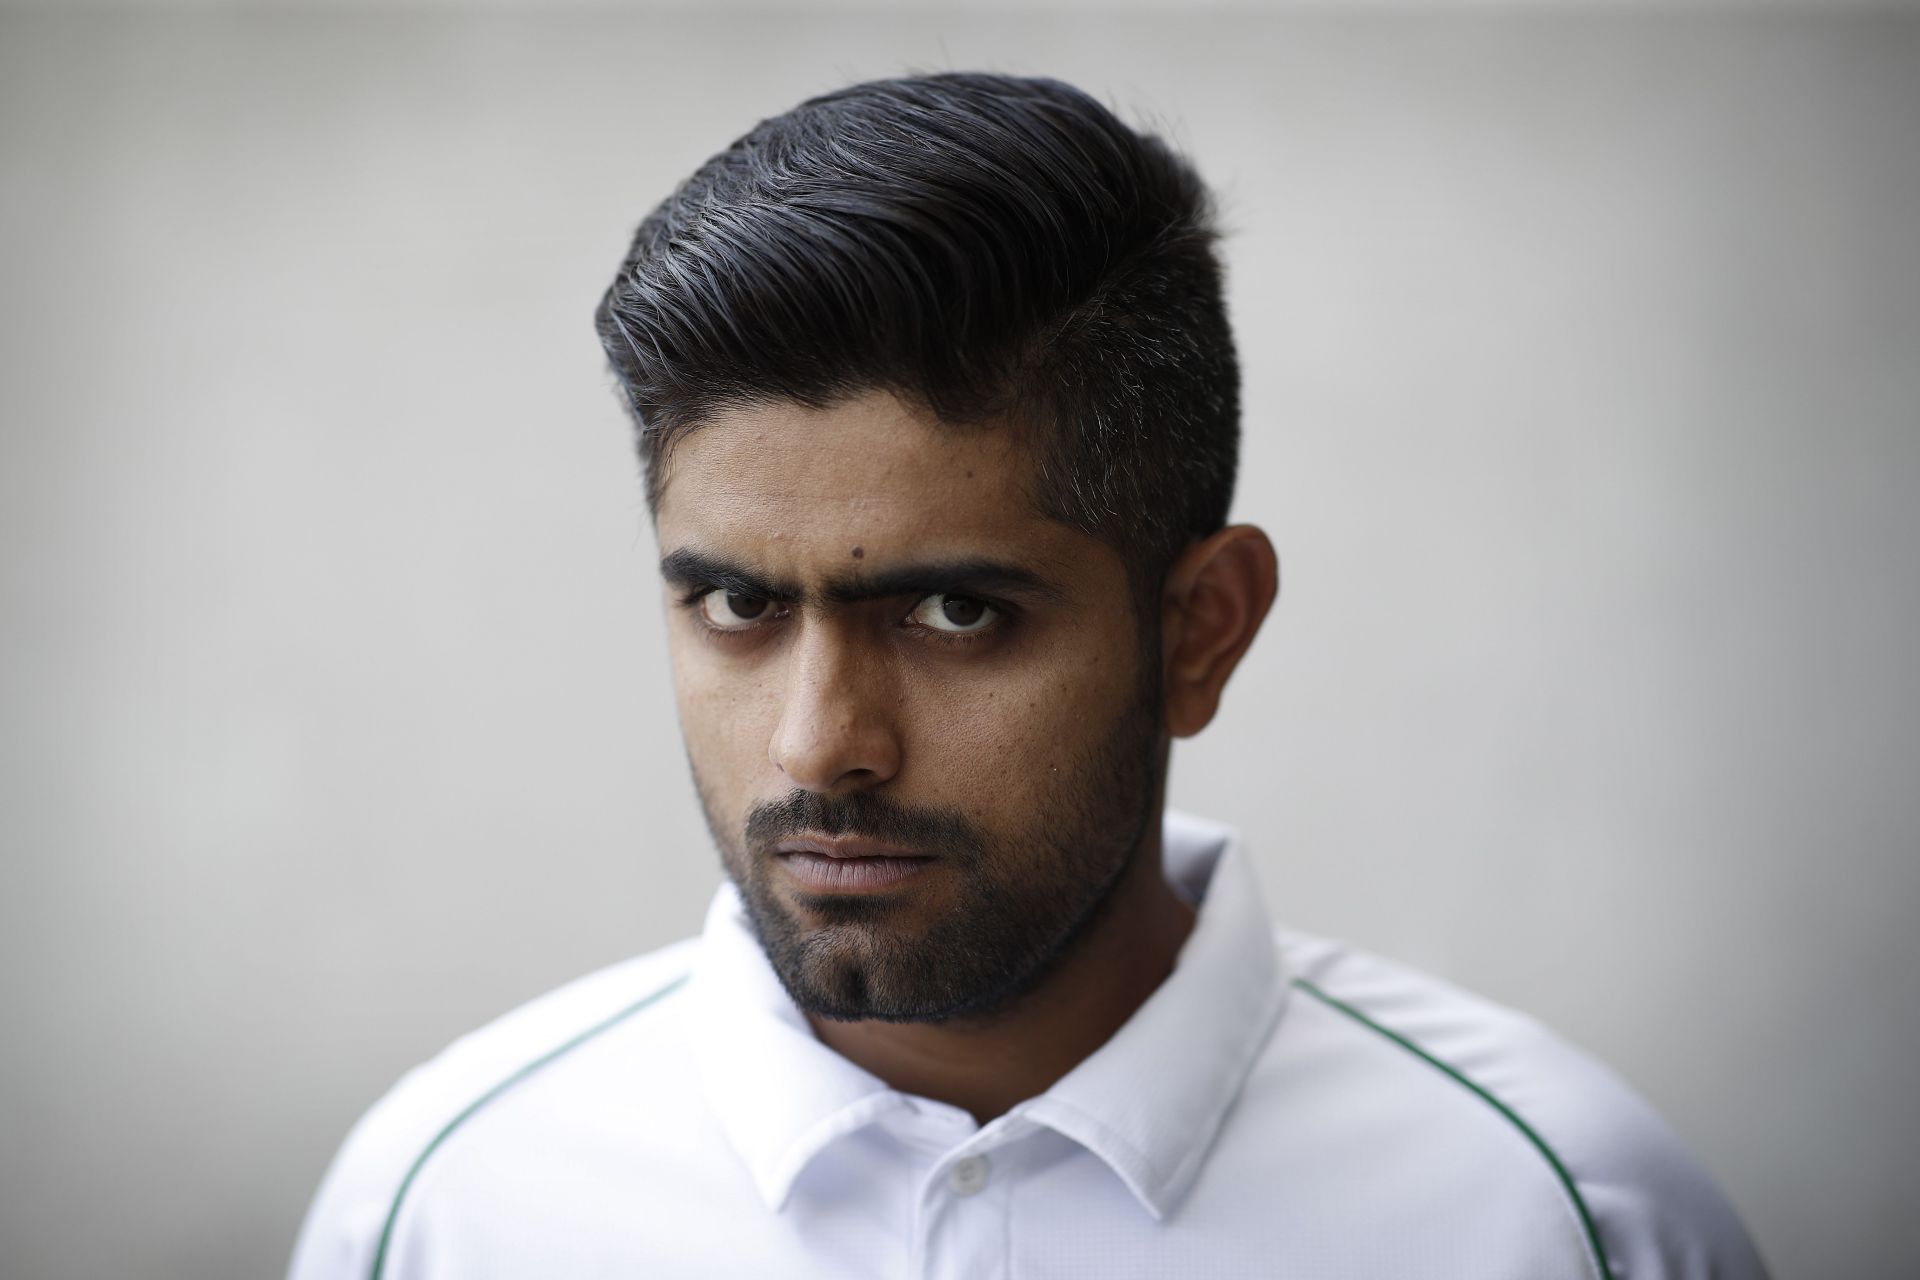 Babar Azam scored a century for Pakistan in the first innings of the Test against Sri Lanka. (Image: Getty)